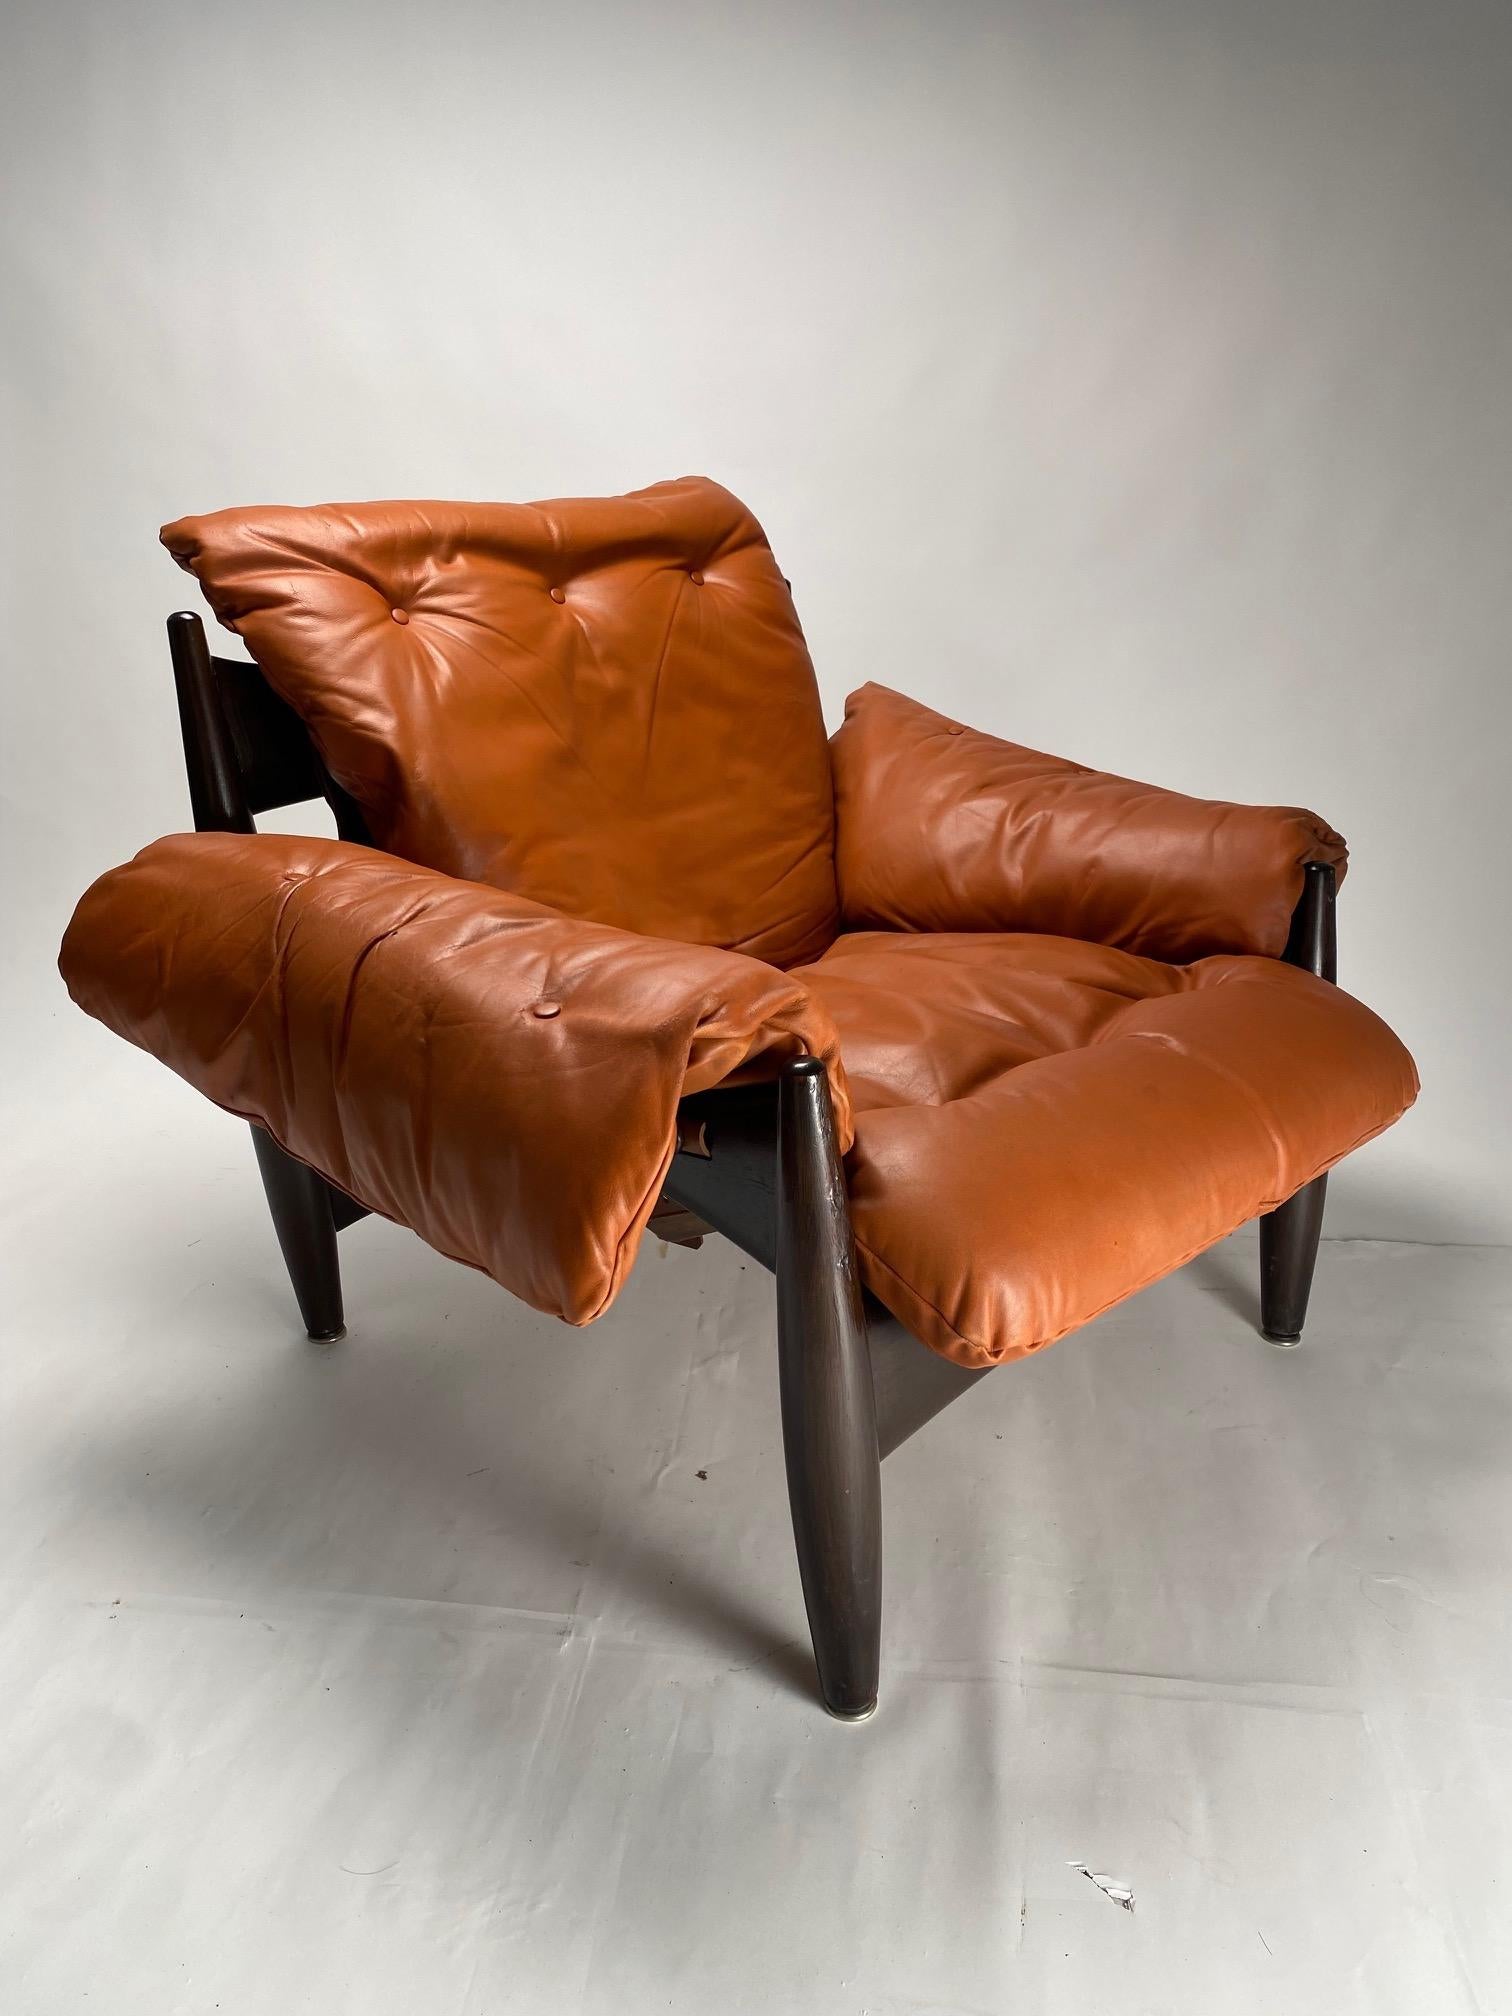 An authentic icon of Mid-Century Brazilian design, the Sheriff armchair is one of the most important and beloved works of the Brazilian designer Sergio Rodrigues. 

Extremely comfortable, the solid wood structure supports a large cognac-coloured